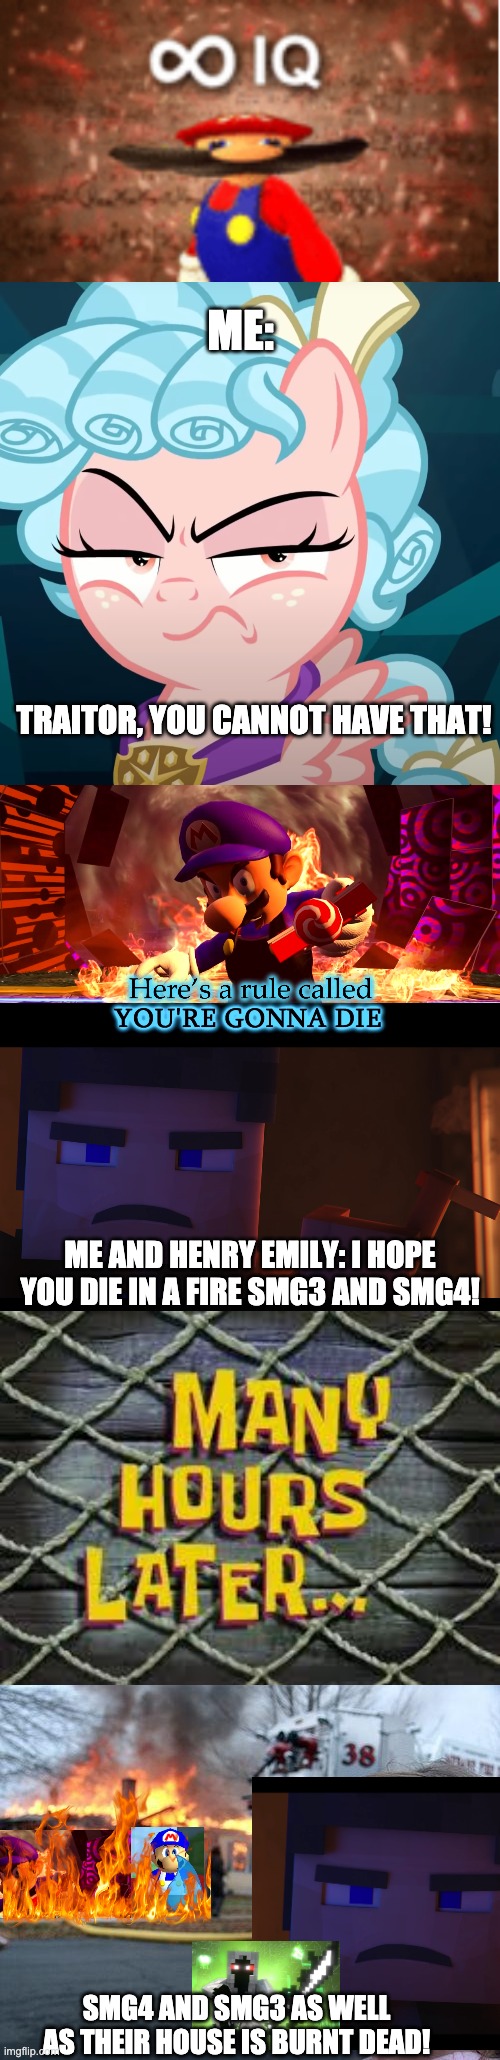 Ending SMG4 and SMG3 and their pals life hence they're no supposed to have infinite IQ! | ME:; TRAITOR, YOU CANNOT HAVE THAT! ME AND HENRY EMILY: I HOPE YOU DIE IN A FIRE SMG3 AND SMG4! SMG4 AND SMG3 AS WELL AS THEIR HOUSE IS BURNT DEAD! | image tagged in infinite iq,memes,mlp,fnaf,smg4,disaster girl | made w/ Imgflip meme maker